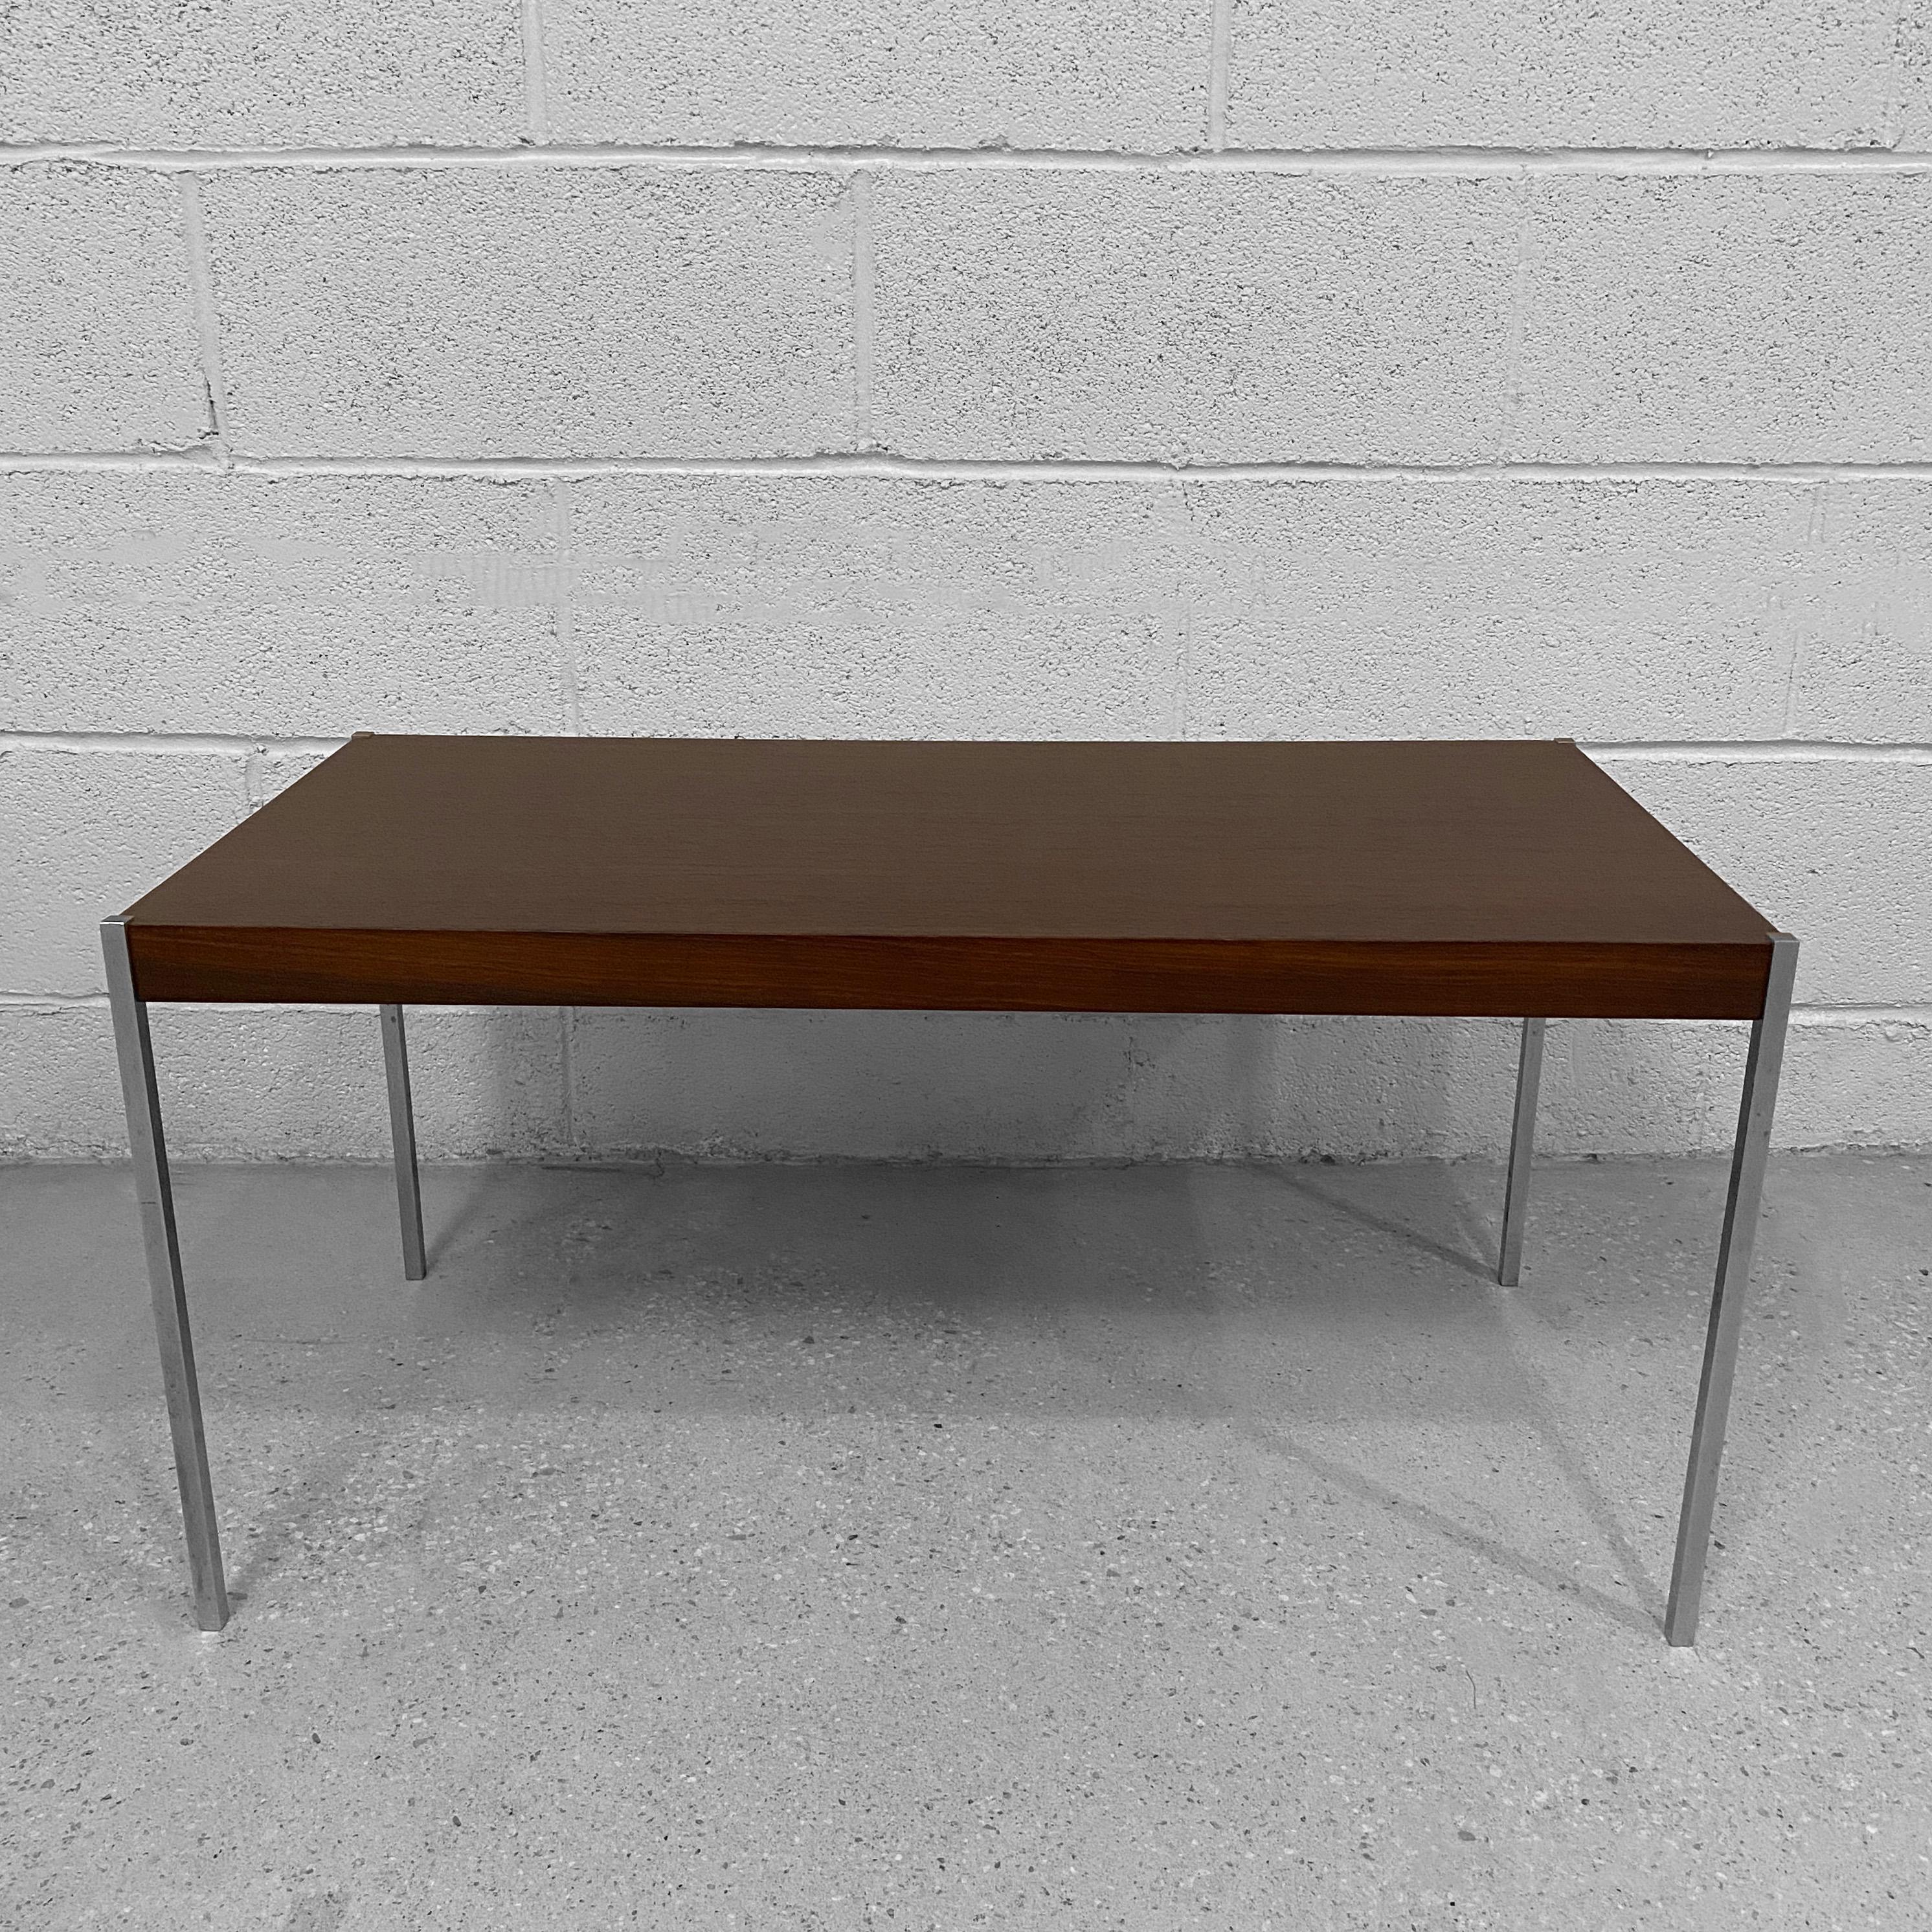 Clean and minimal, Scandinavian modern coffee table by Uno & Östen Kristiansson for Luxus features a rosewood top with slender steel legs.